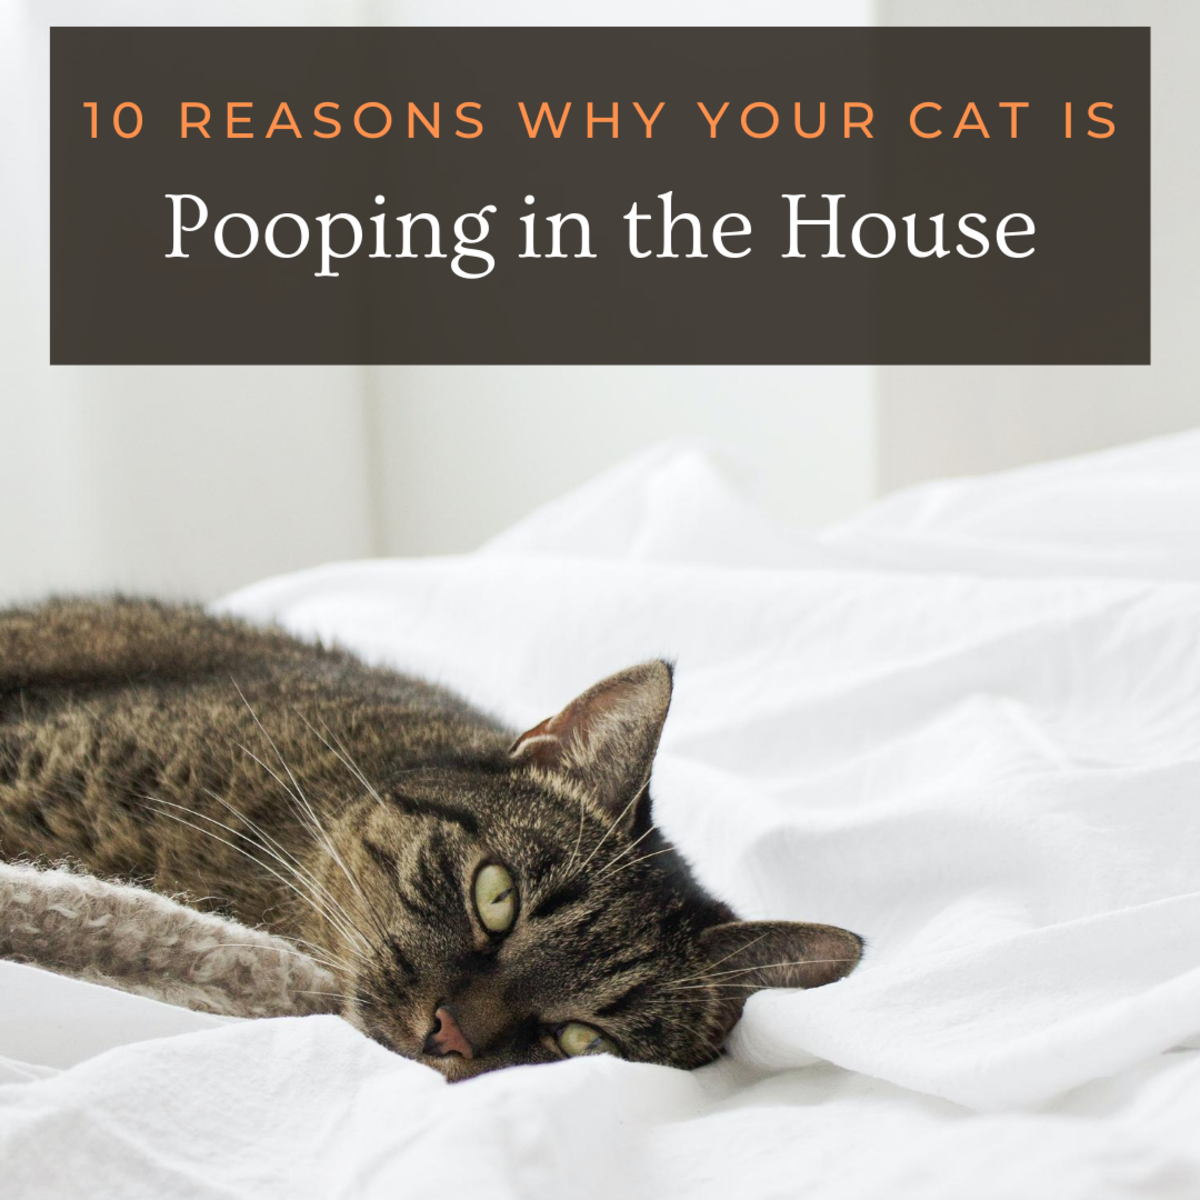 10 Reasons Why Cats Poop in the House